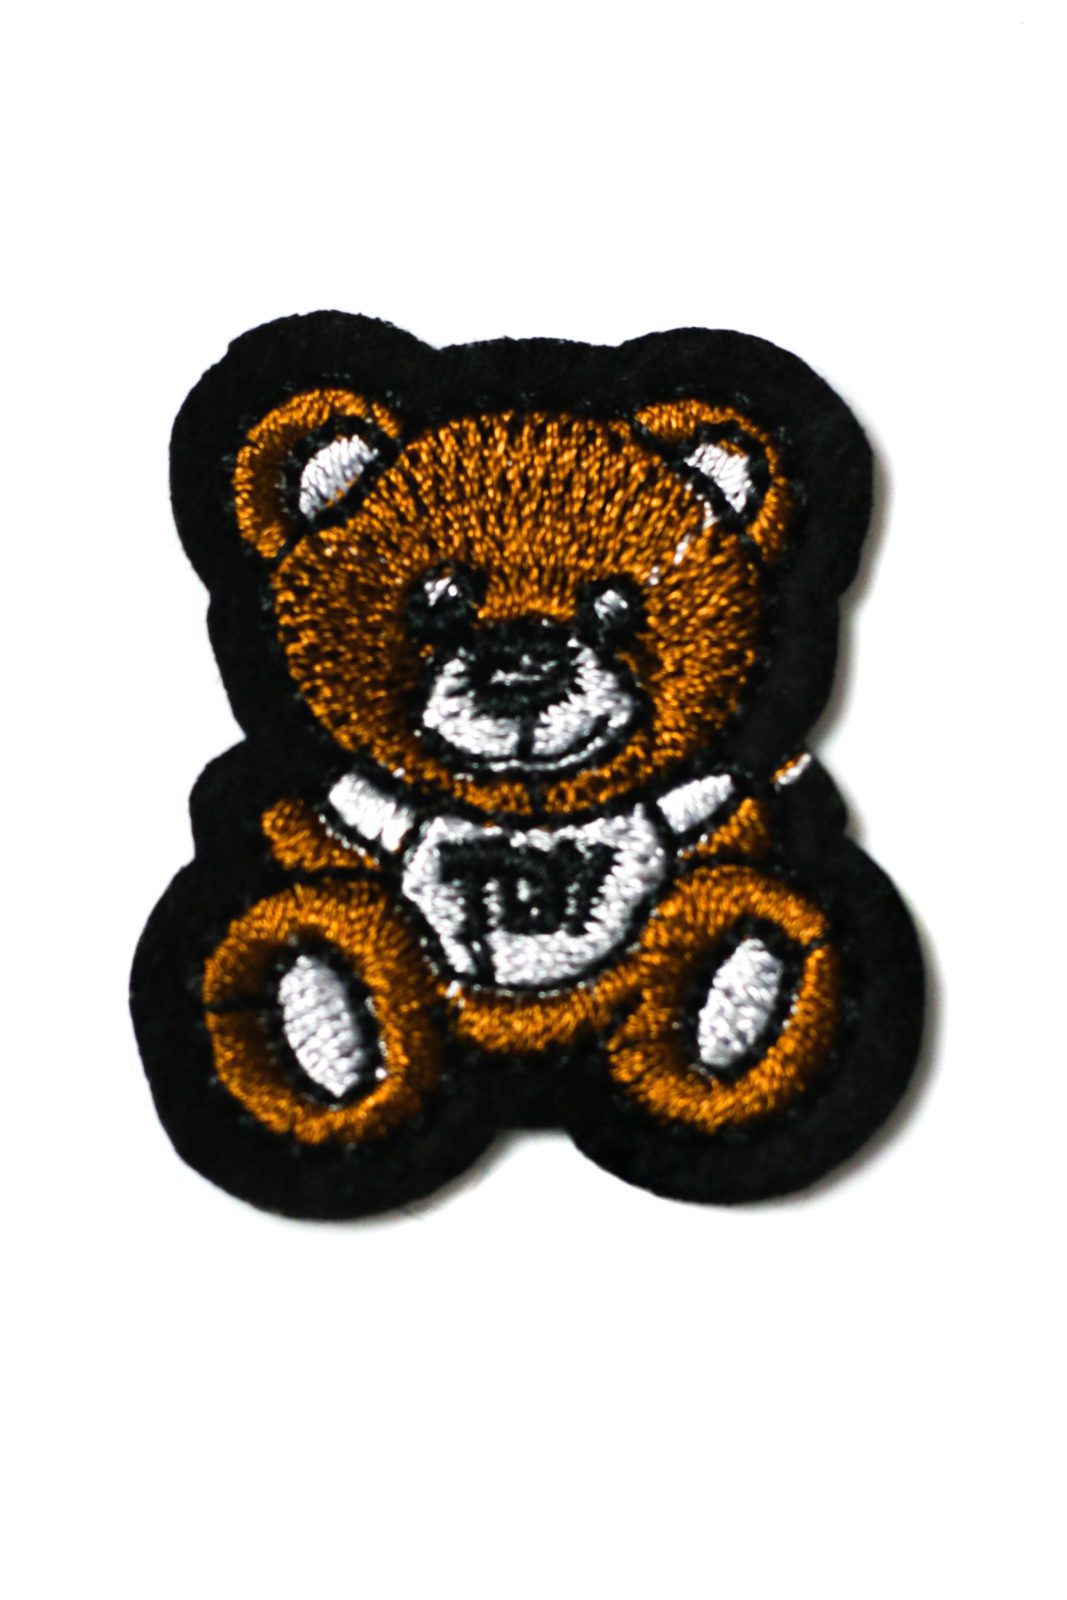 Brown bear iron on embroidery patches